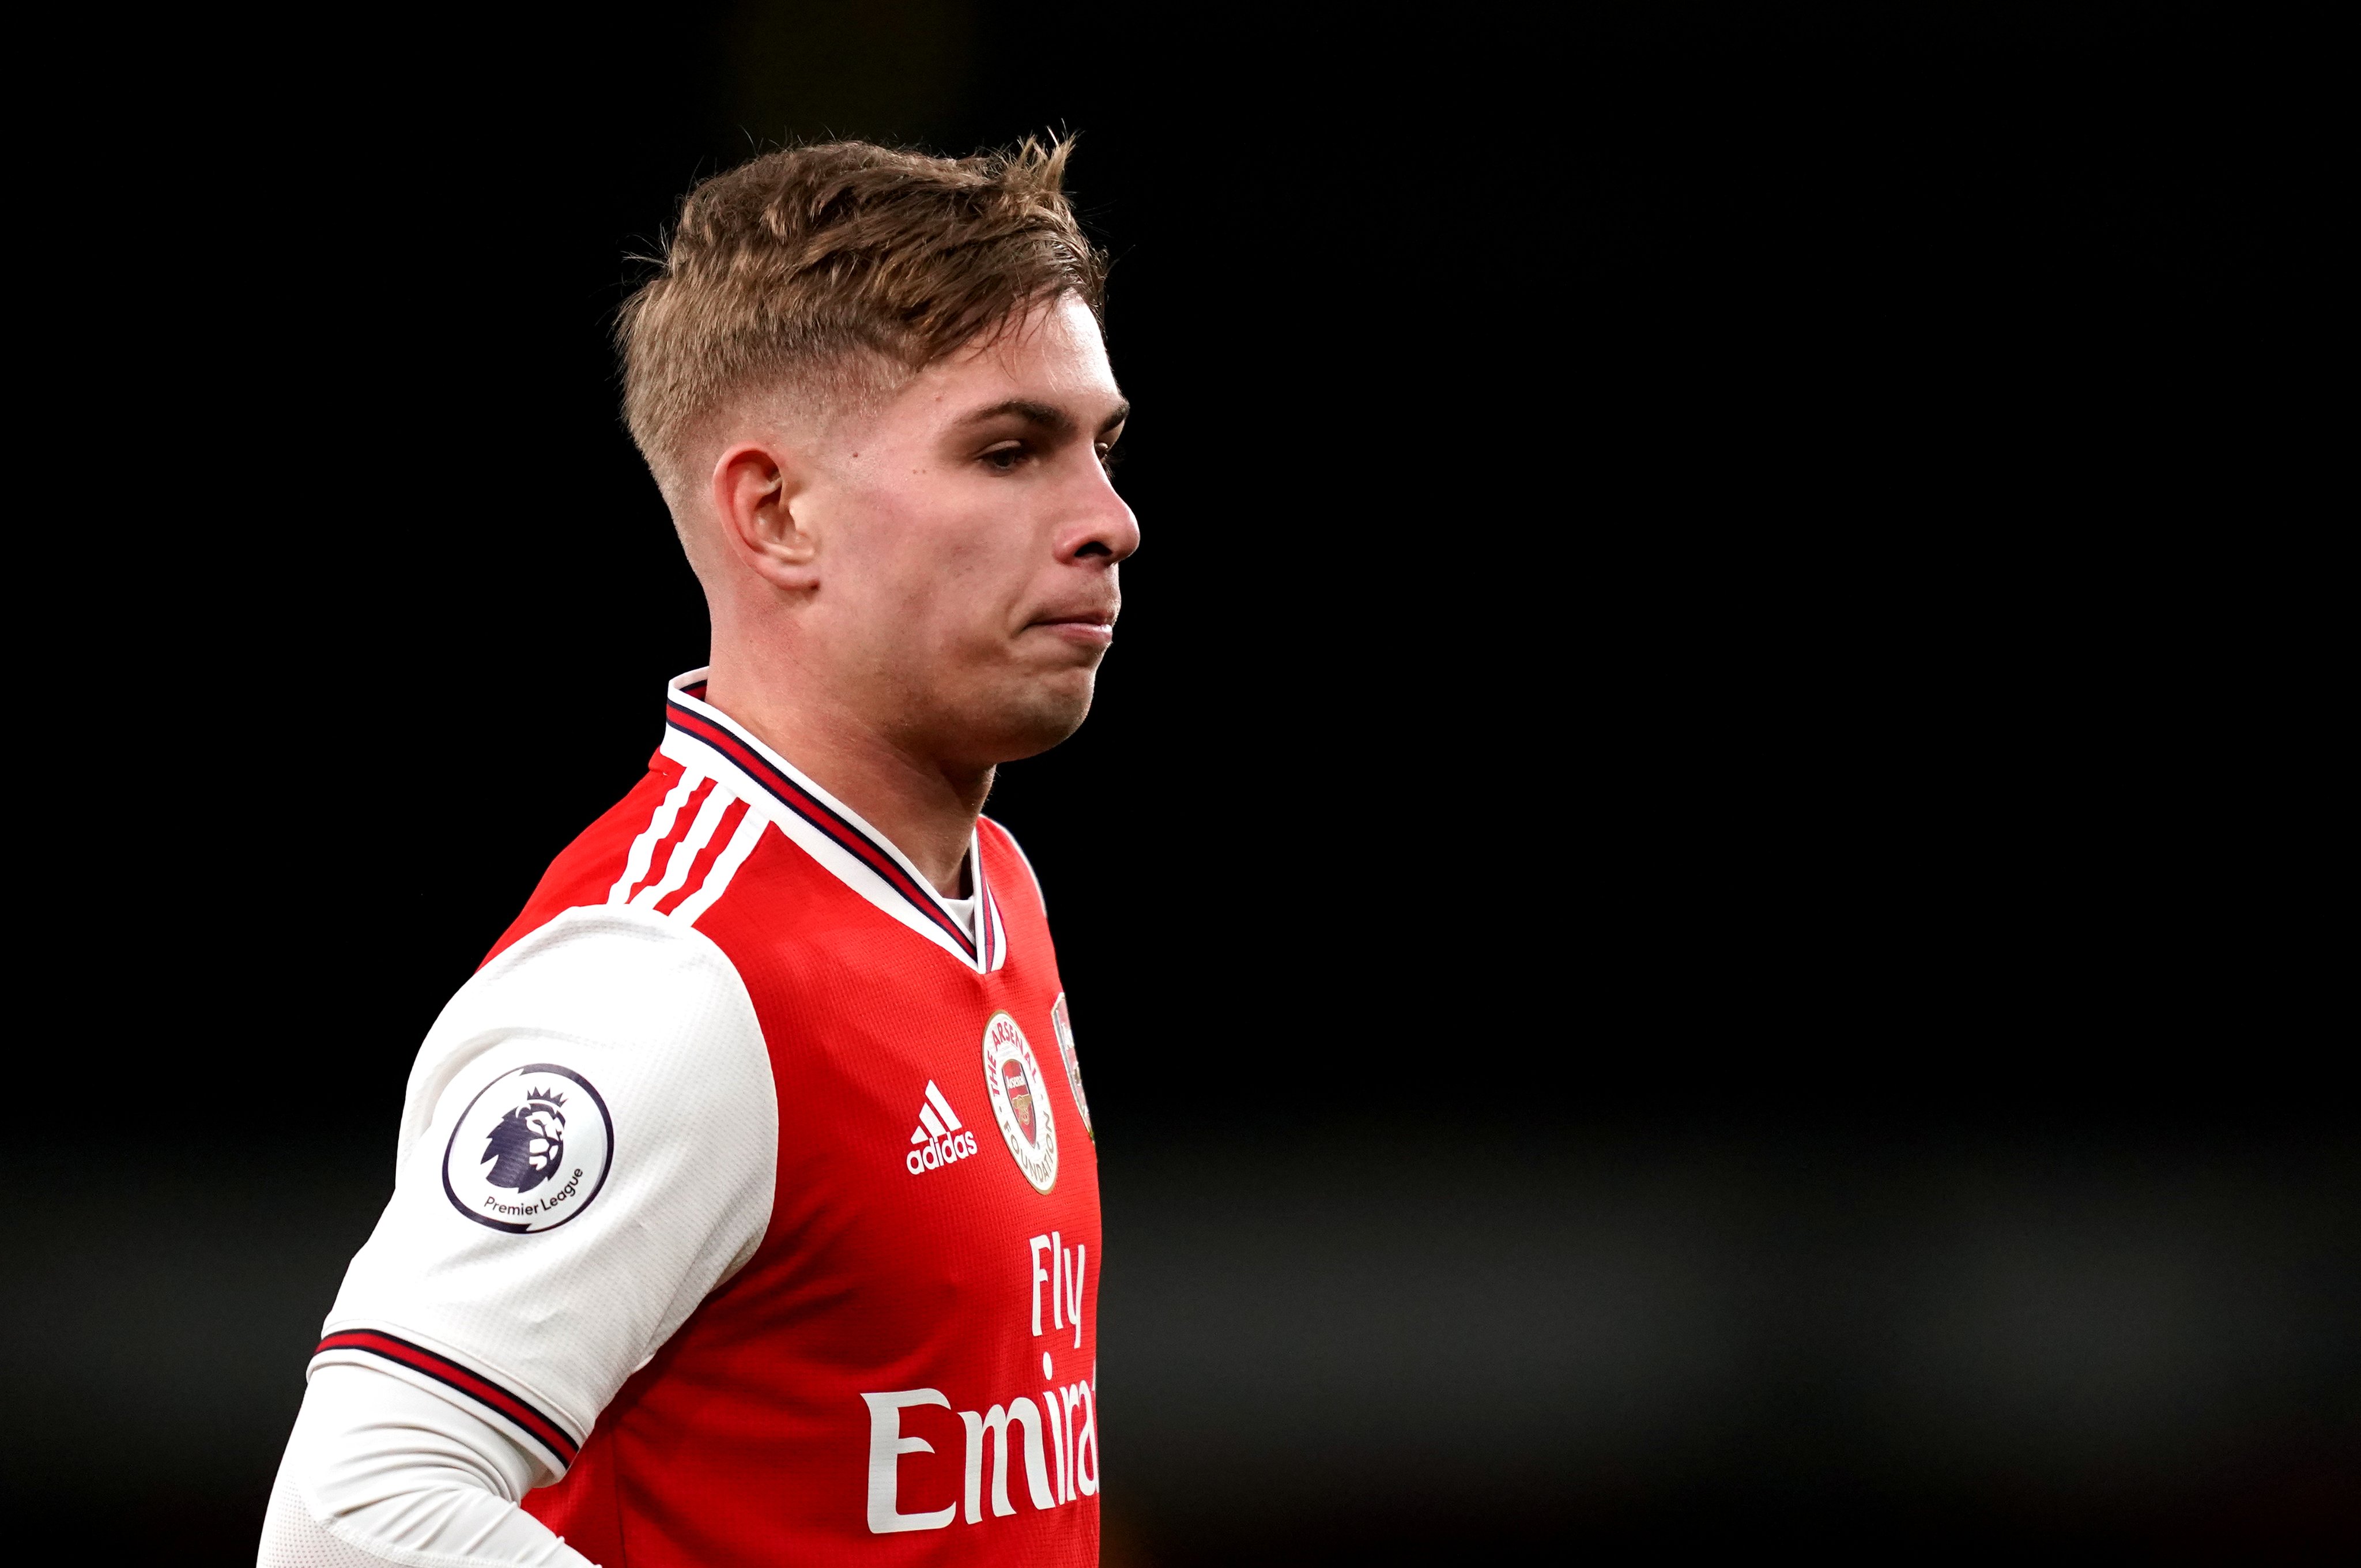 Concerned about the fact that we don’t have Emile Smith Rowe available, admits Mikel Arteta